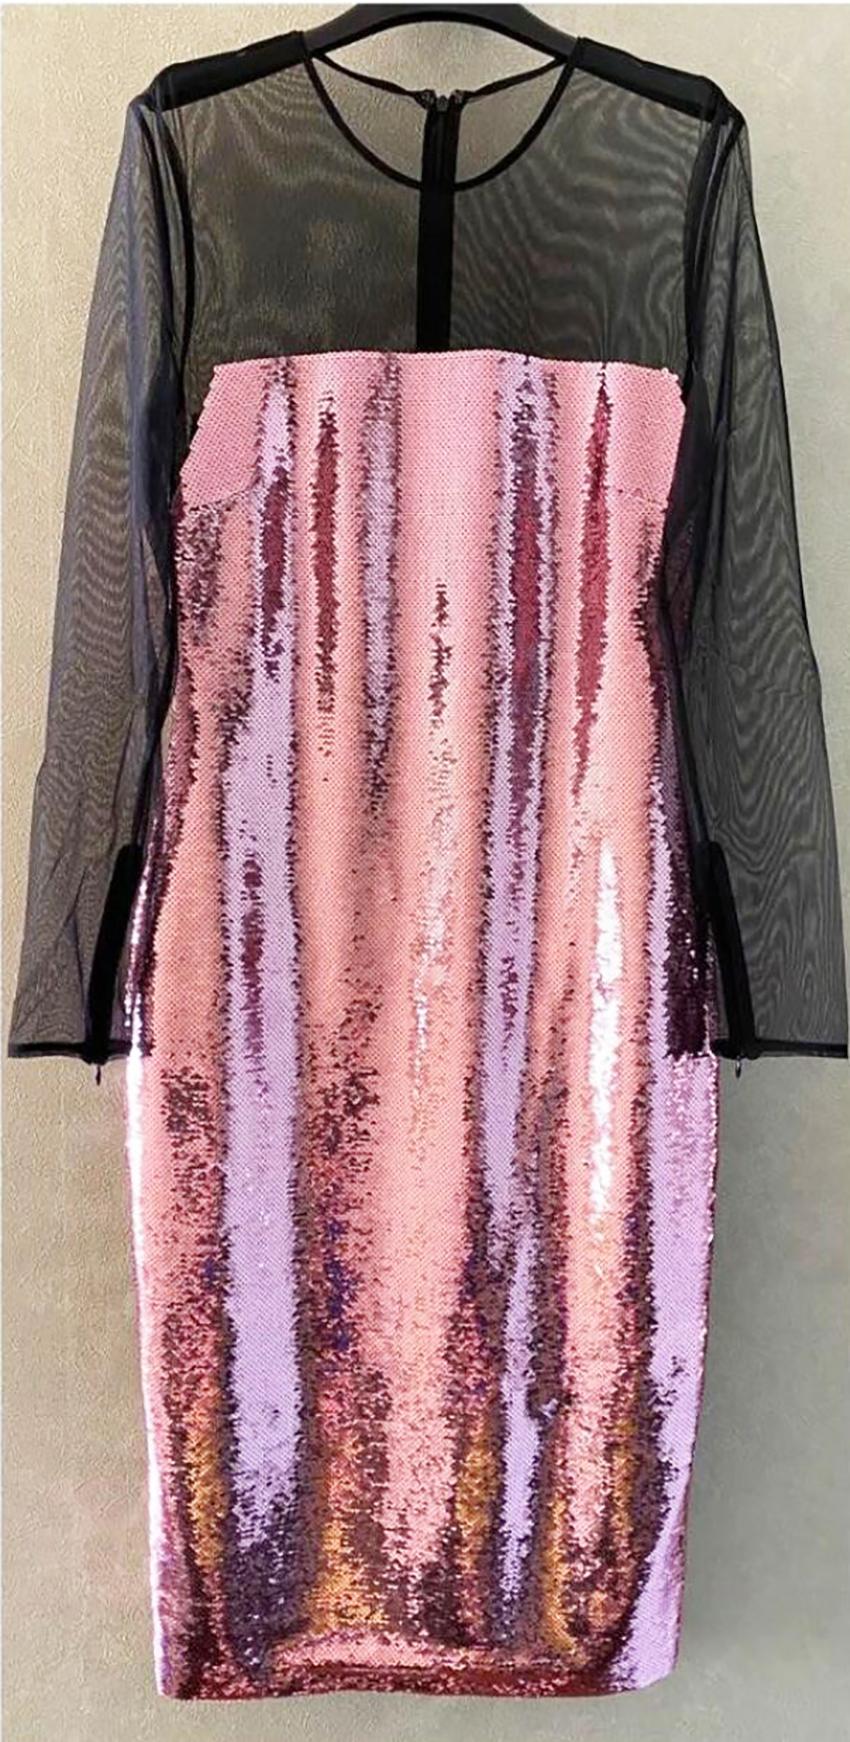 TOM FORD

Black dress with pink sequins
Transparent sleeves 

Size: 38 - 2 


Pre-owned. Excellent condition. 
PLEASE VISIT OUR STORE FOR MORE GREAT ITEMS